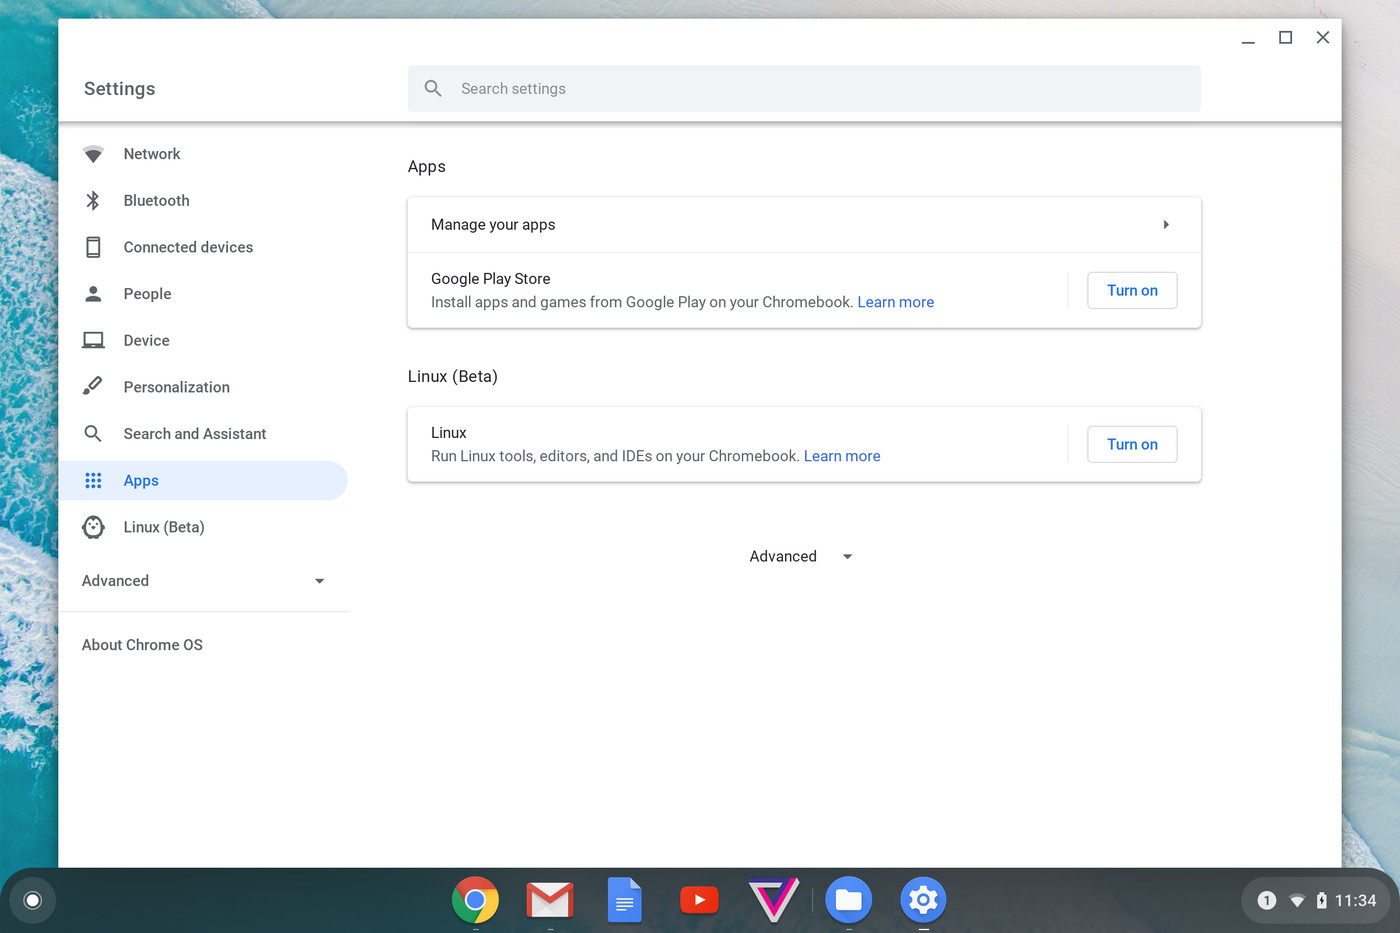 Chromebook spotify app log in through facebook issues